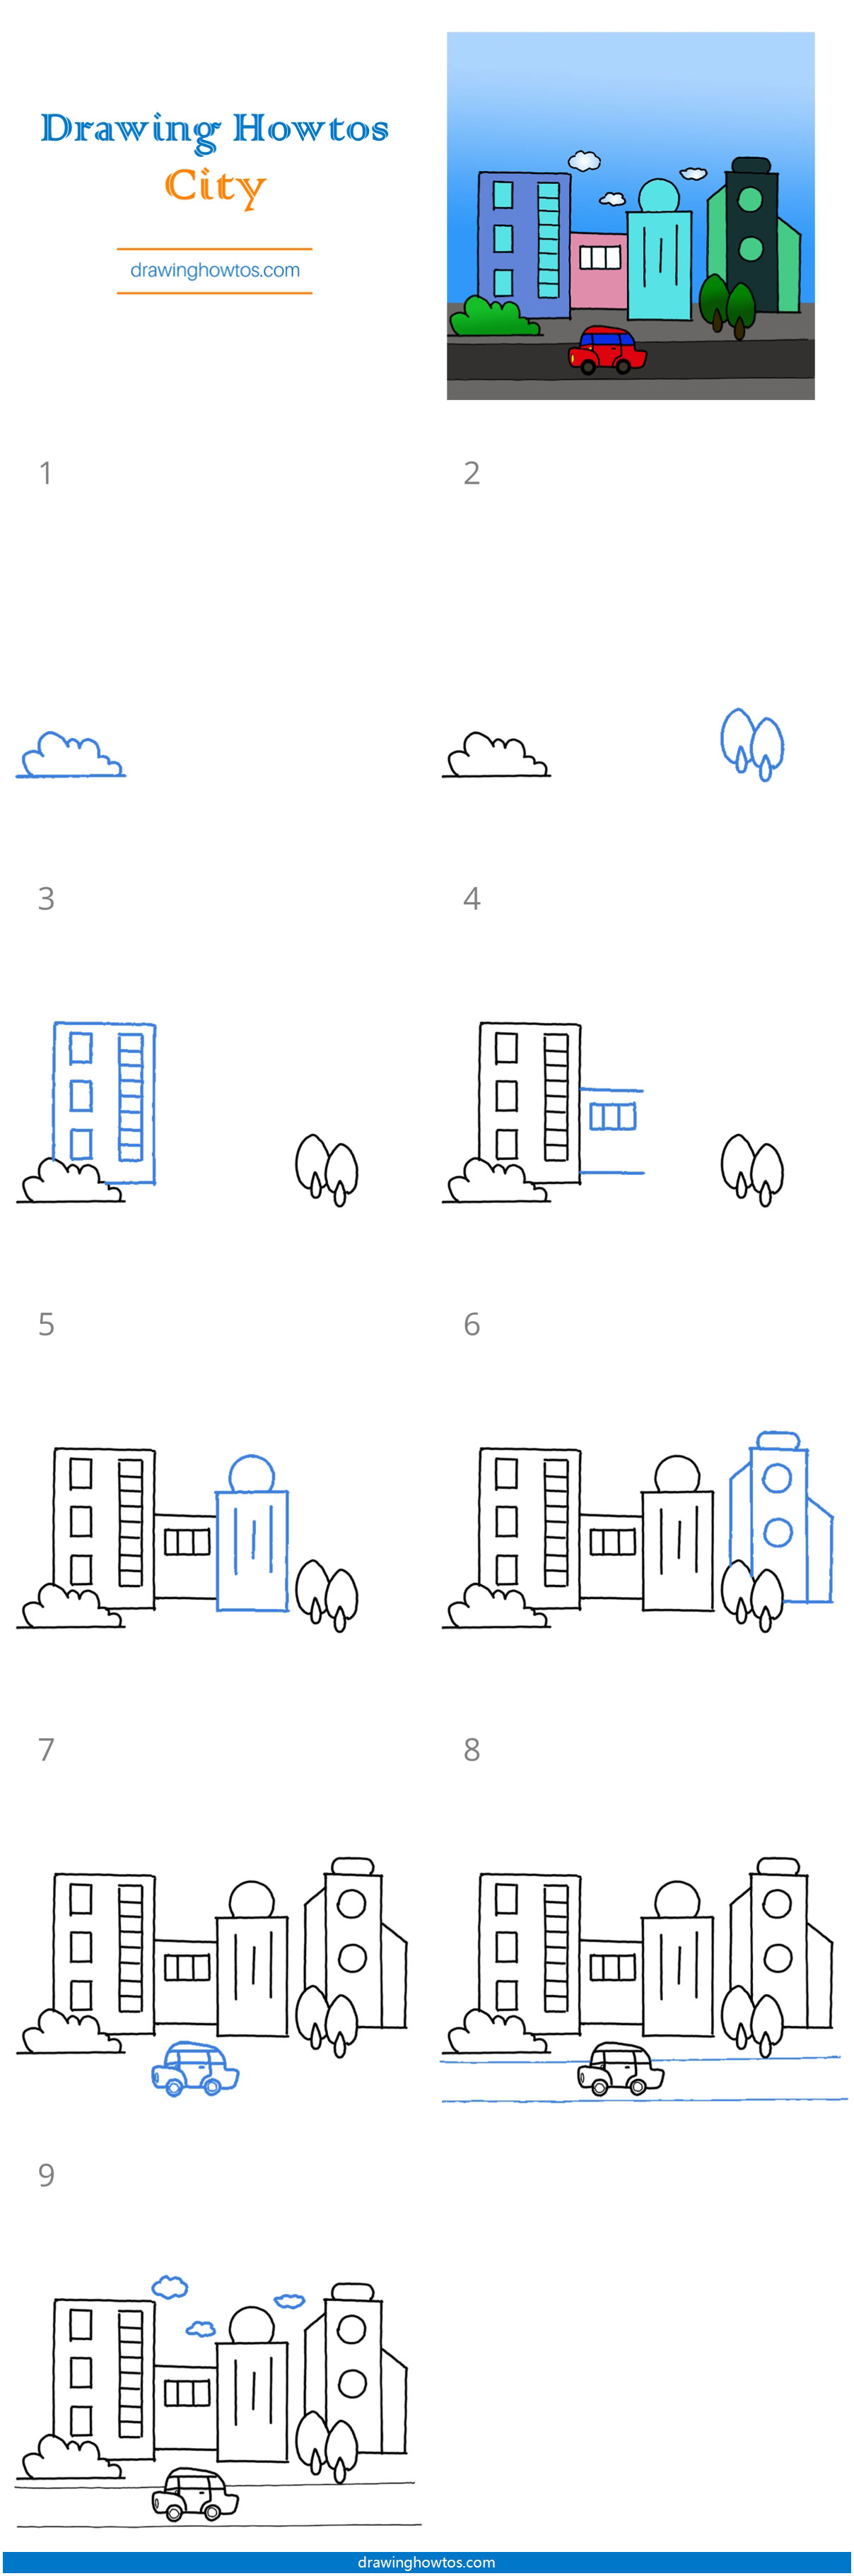 How to Draw a Cityscape Step by Step